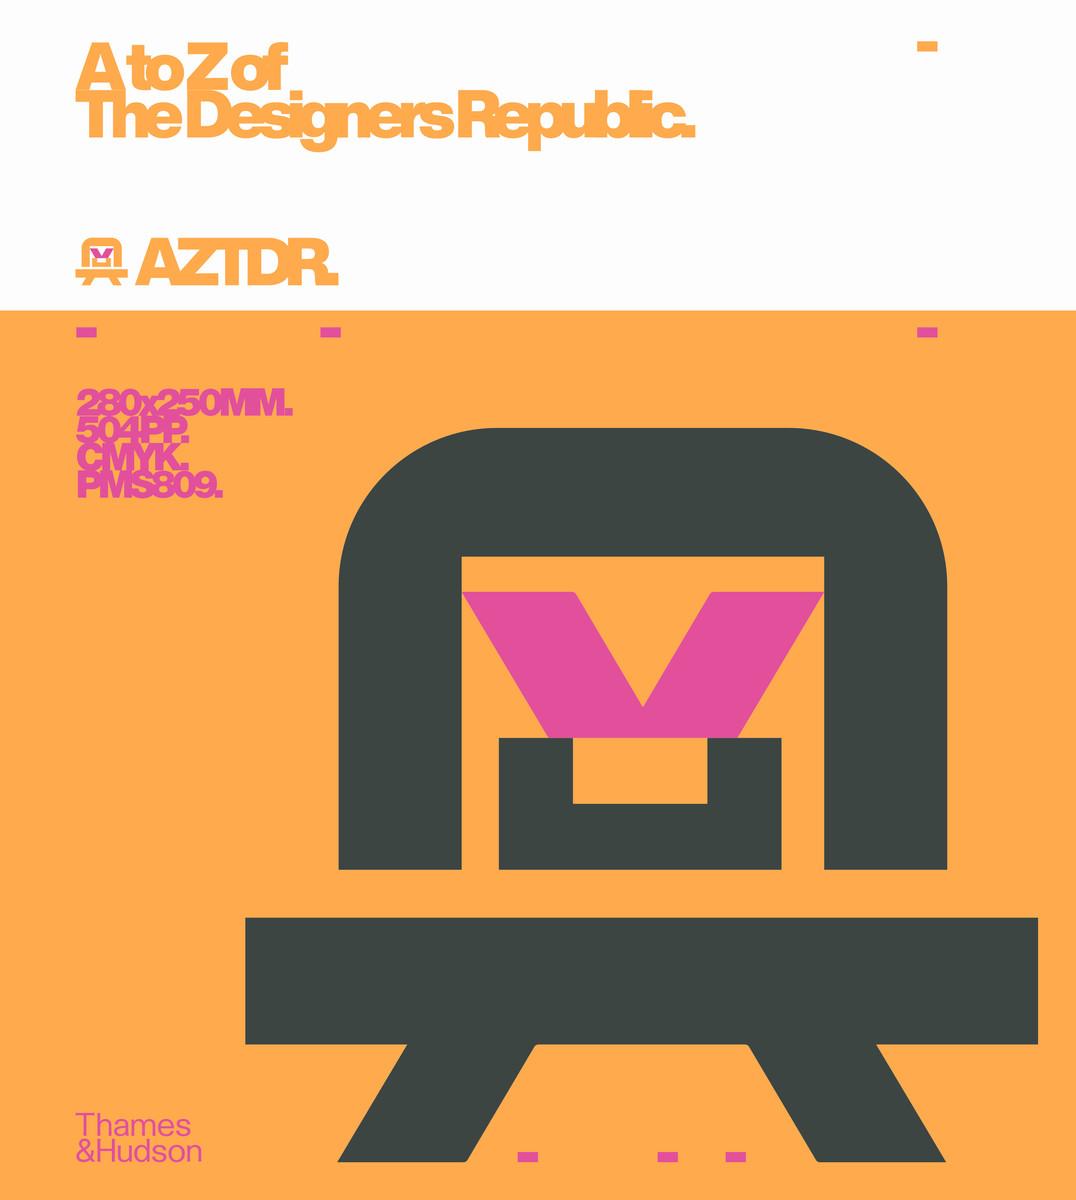 Book A to Z of The Designers Republic Ian Anderson